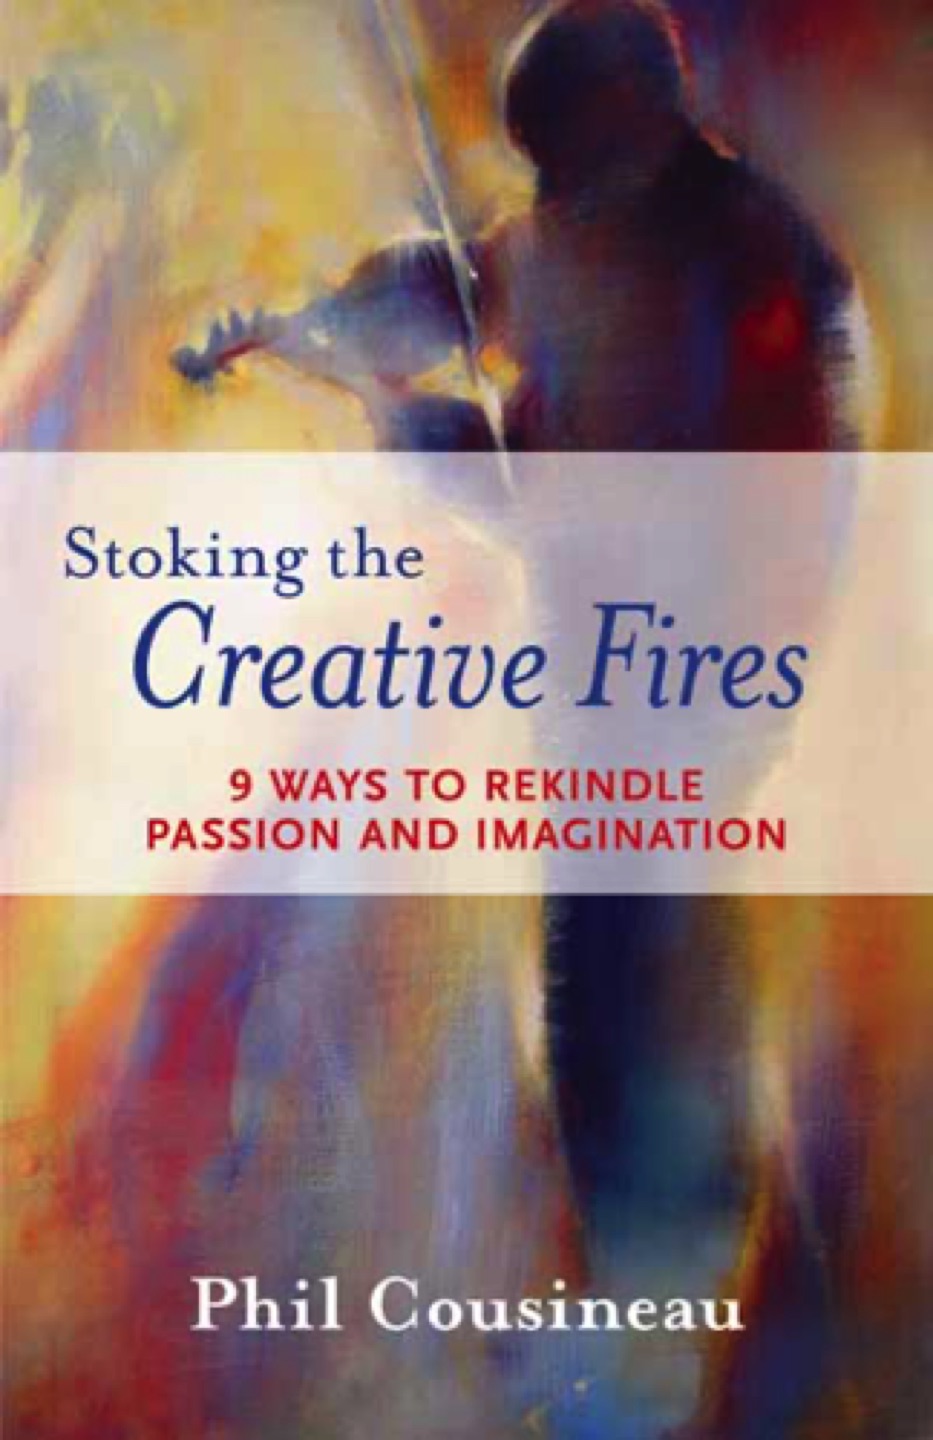 Gregg Chadwick's Fire Dream on the Cover of Phil Cousineau's Stoking the Creative Fires